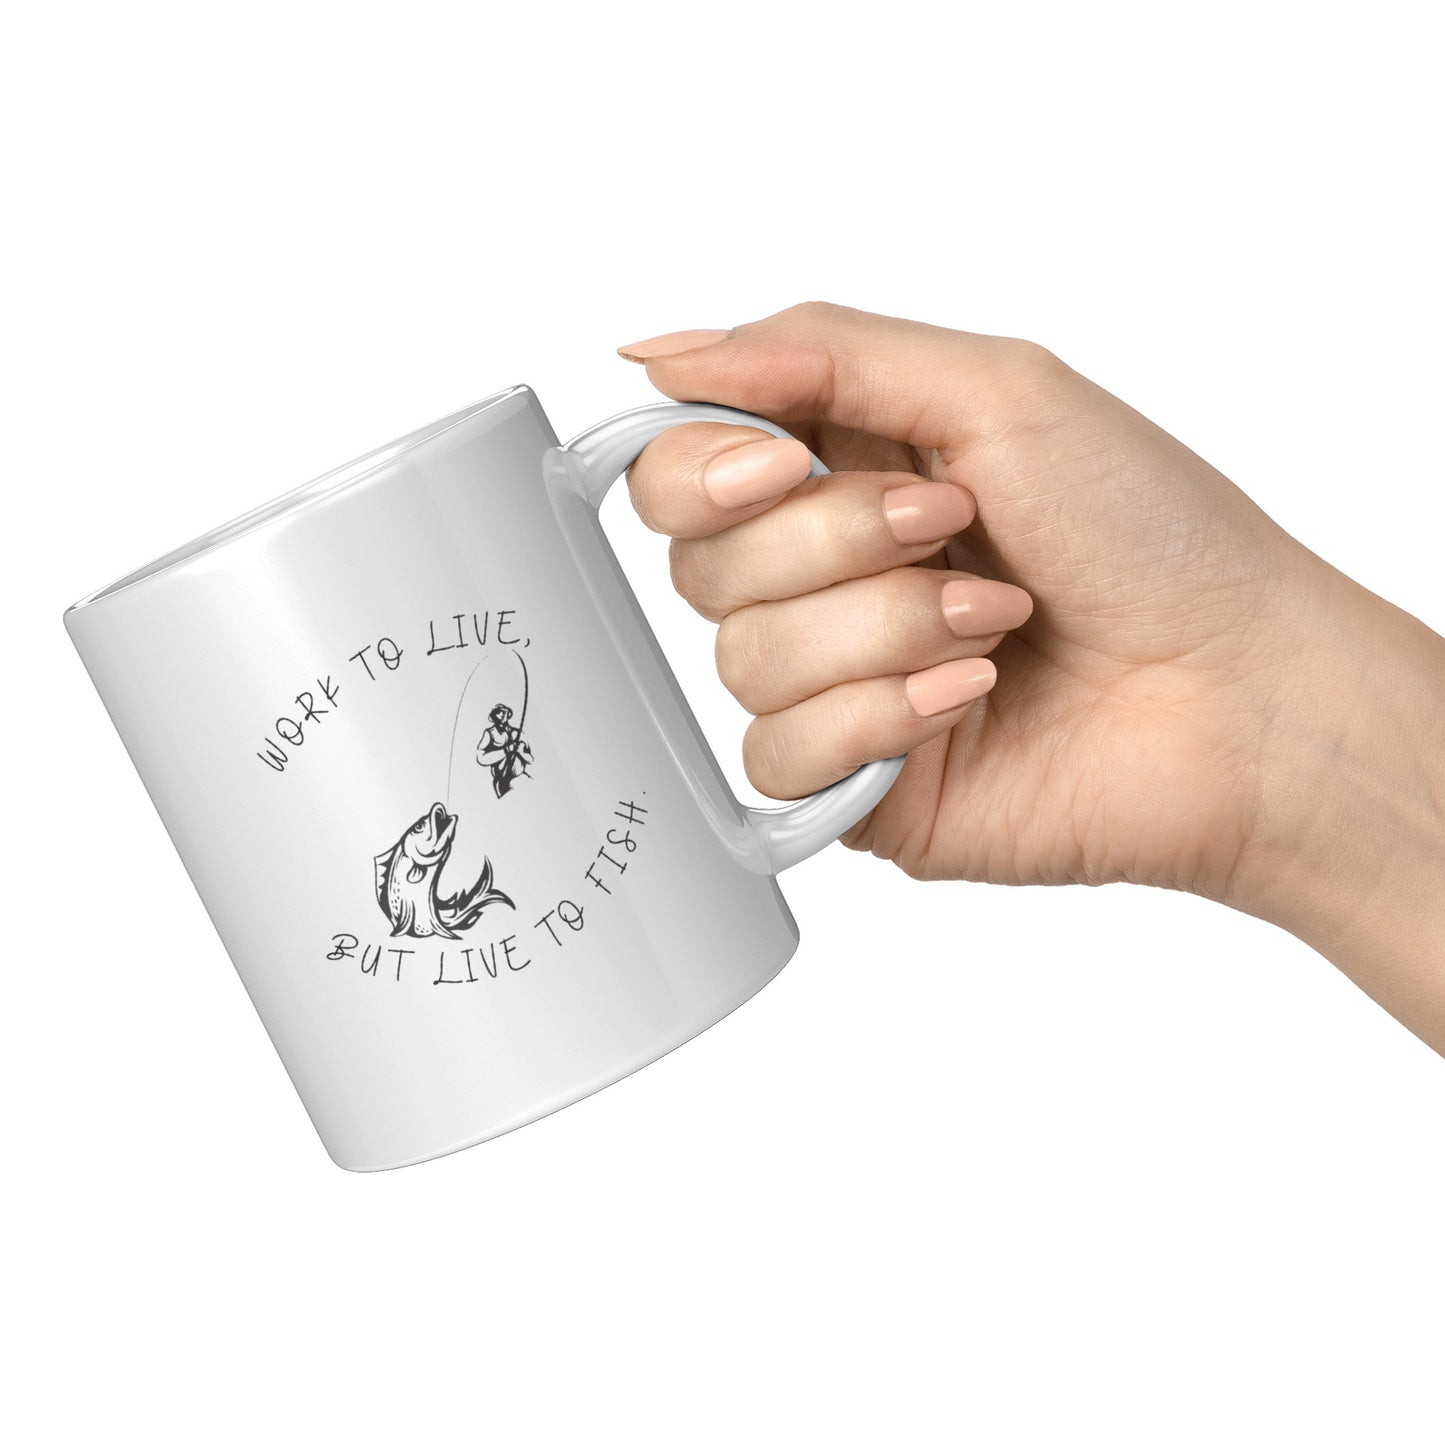 "Live To Fish" Mug For The Outdoor Enthusiast